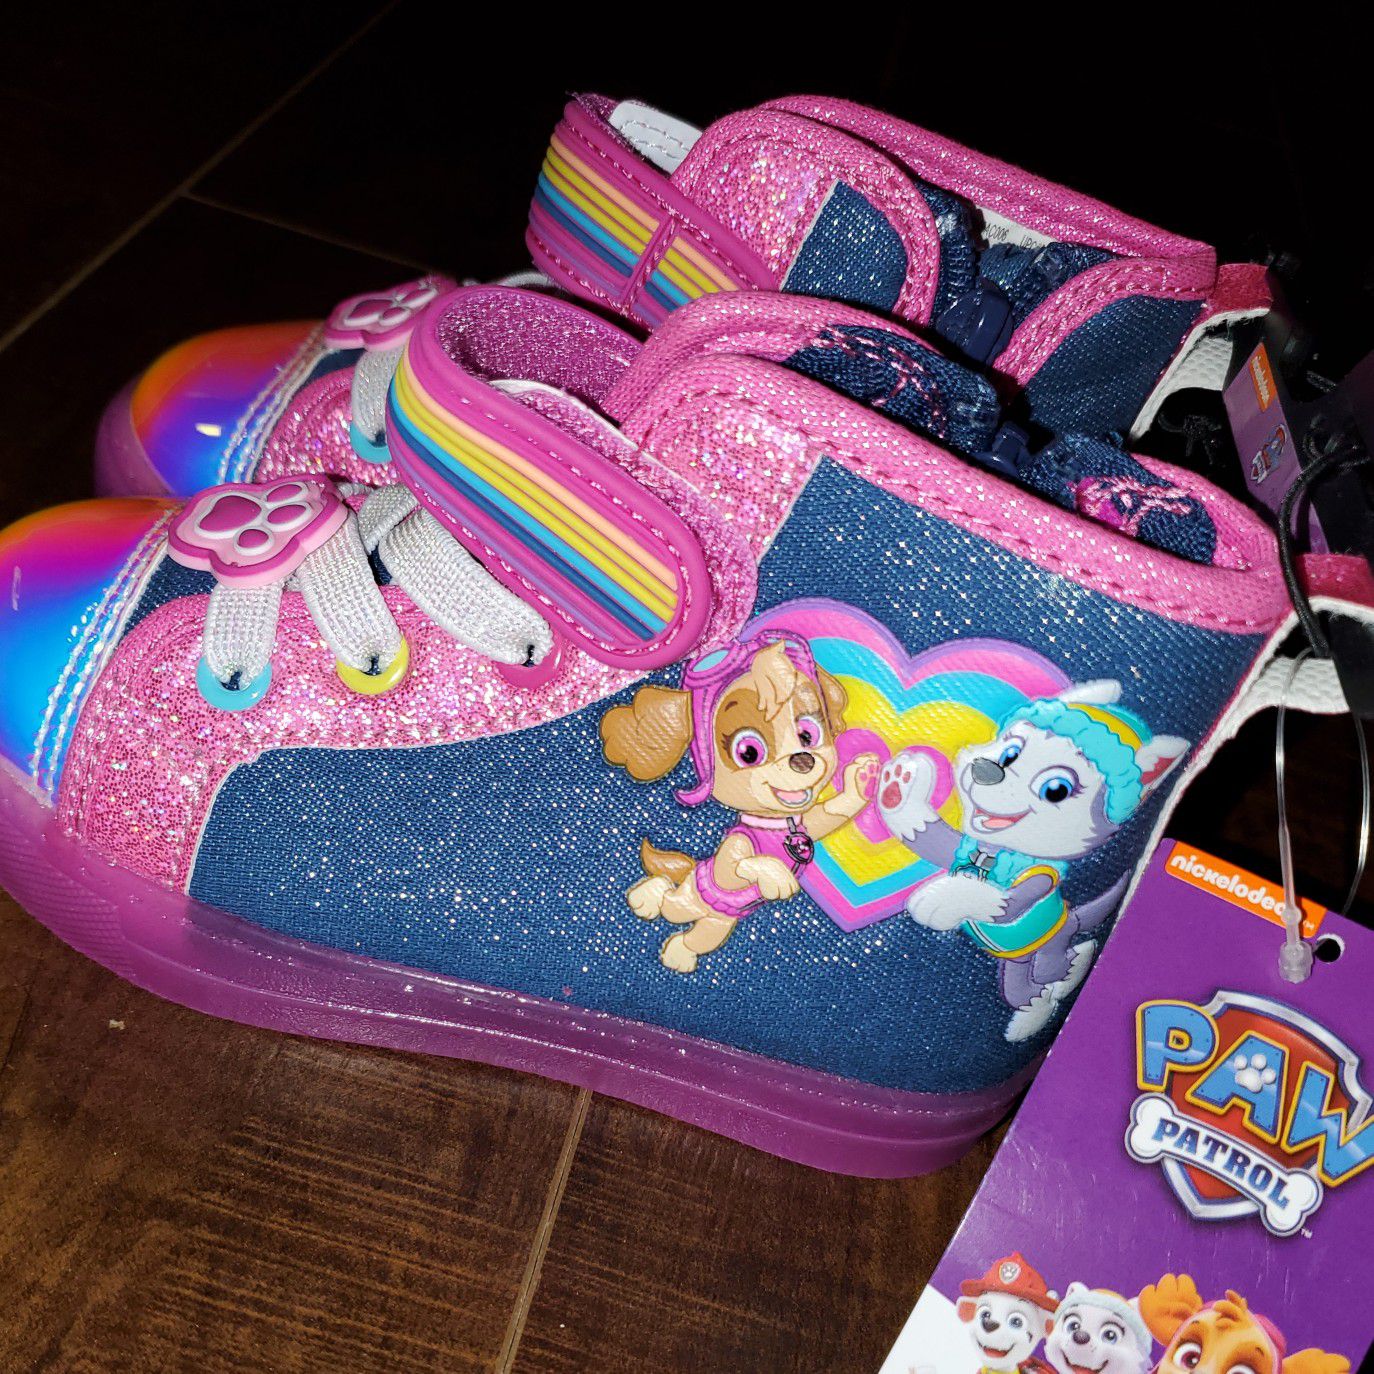 2 NEW Girl's Size 7 Paw Patrol Boots/Shoes